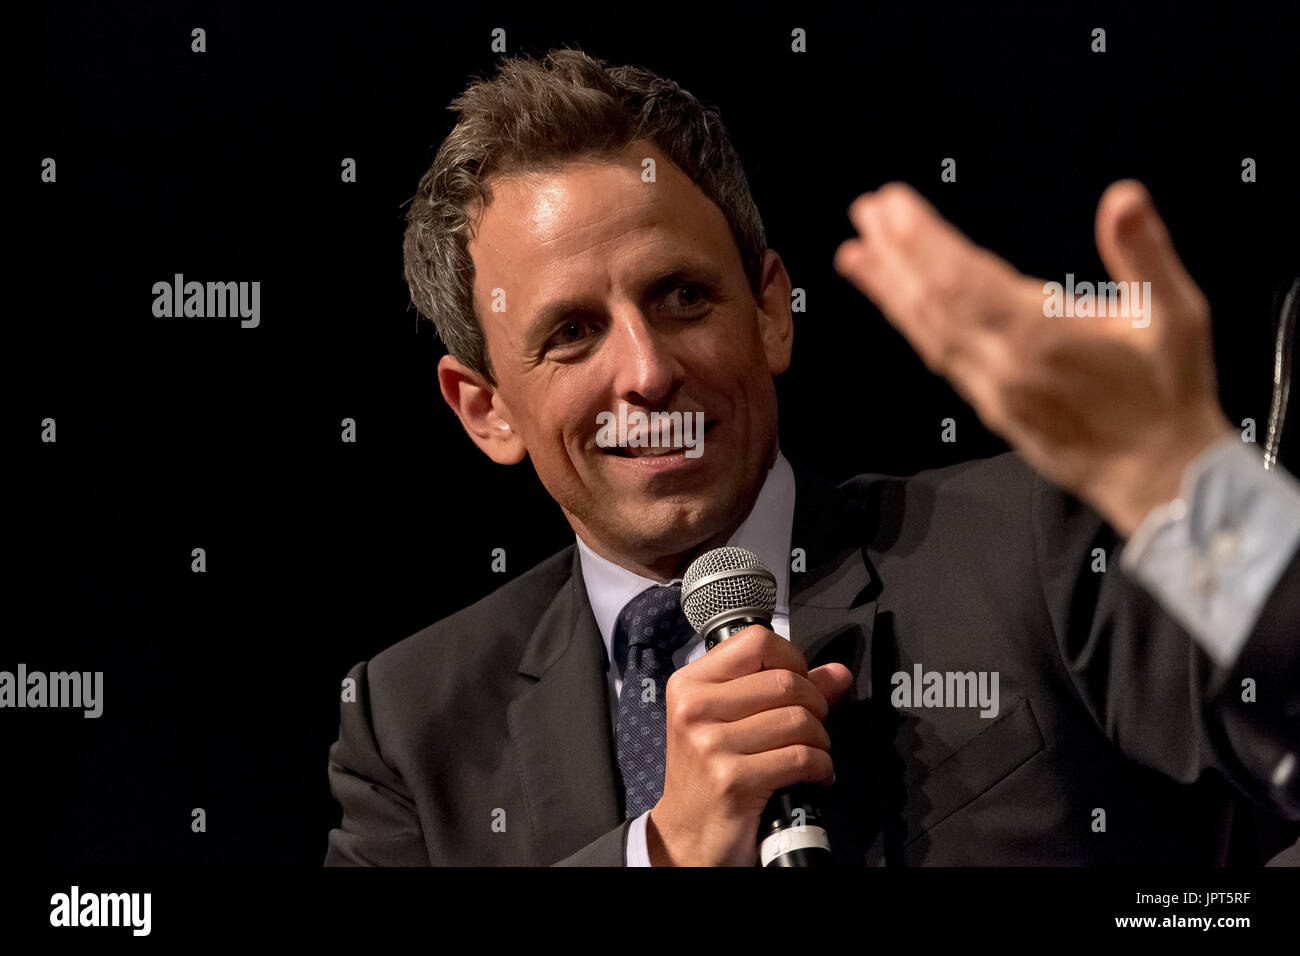 Seth Meyers is seen at Cooper Union. U.S. Senator for Minnesota Al Franken participated in a conversation with comedian and late-night host Seth Meyers in the Great Hall at Cooper Union. At the event, organized by The Strand bookstore, Senator Franken discussed his career in politics and his new book "Giant of the Senate." Credit: PACIFIC PRESS/Alamy Live News Stock Photo